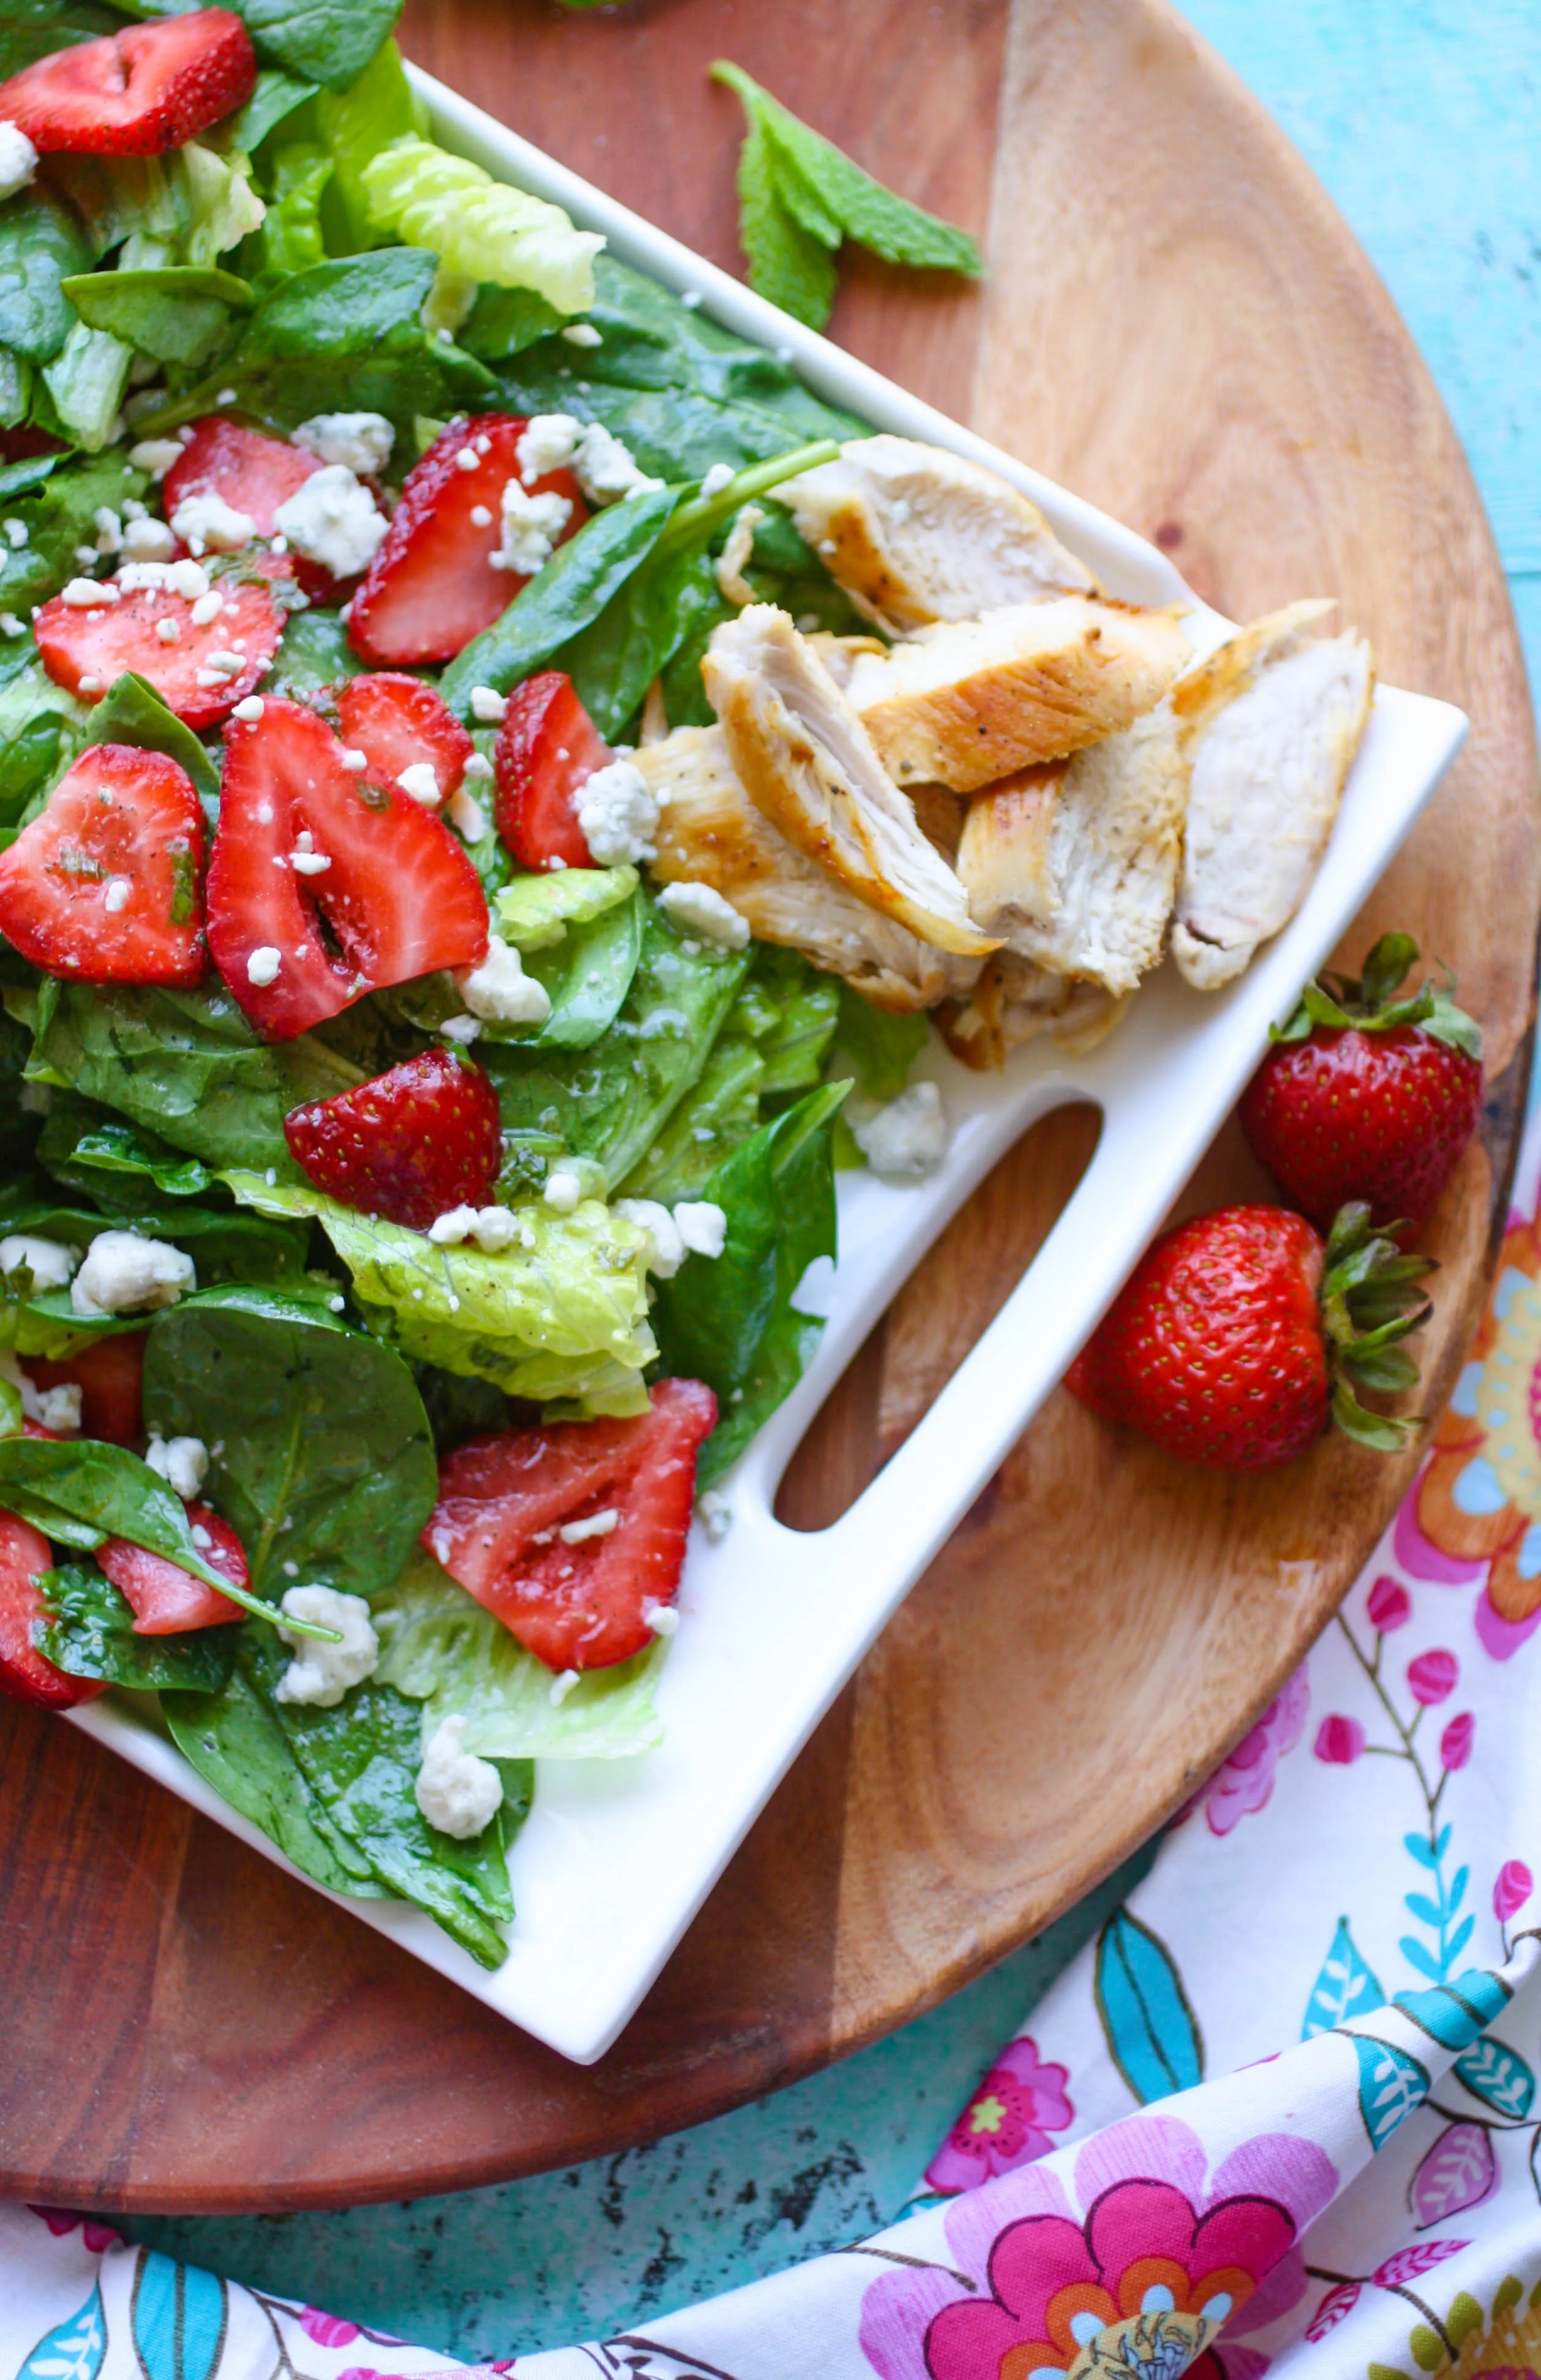 Chicken Salad with Strawberries and Honey-Lemon Mint Dressing is a sweet, satisfying meal. You'll love the flavors and colors in this easy-to-make, hearty salad.